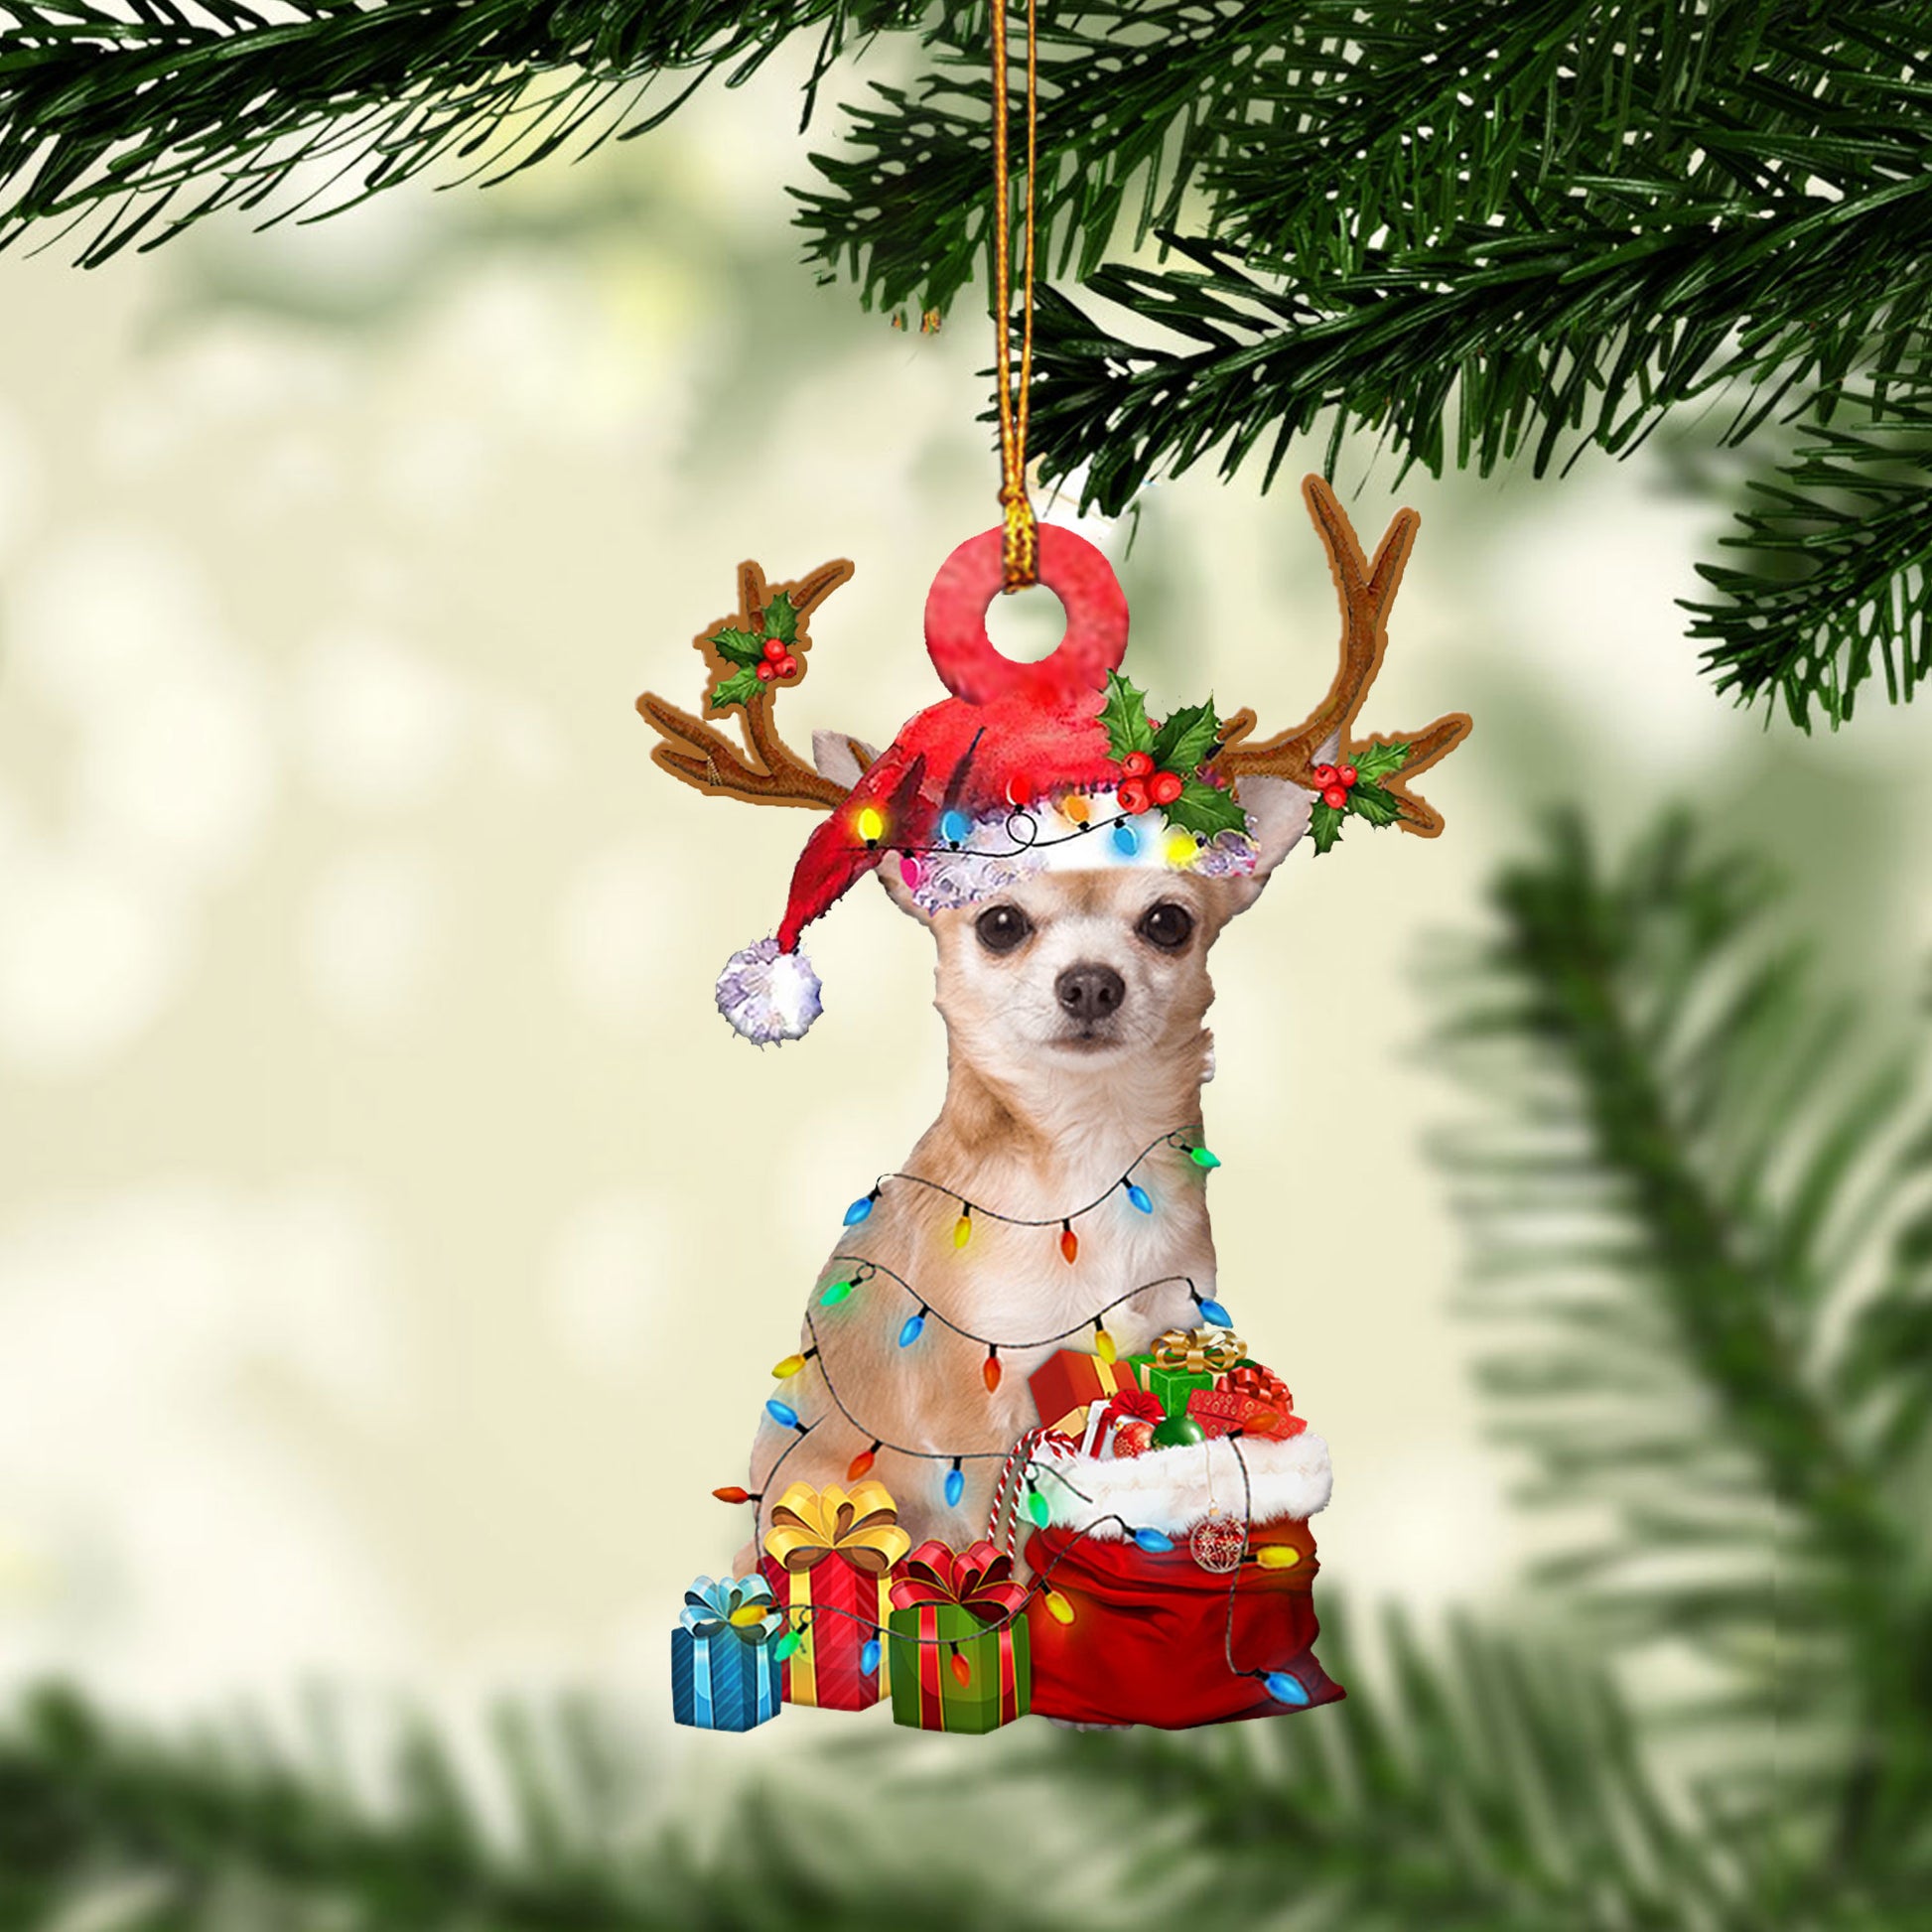 Ohaprints-Christmas-Ornament-2D-Flat-Chihuahua-Wearing-Reindeer-With-String-Light-Gift-For-Dog-Lovers-Xmas-Tree-Decor-Gift-187